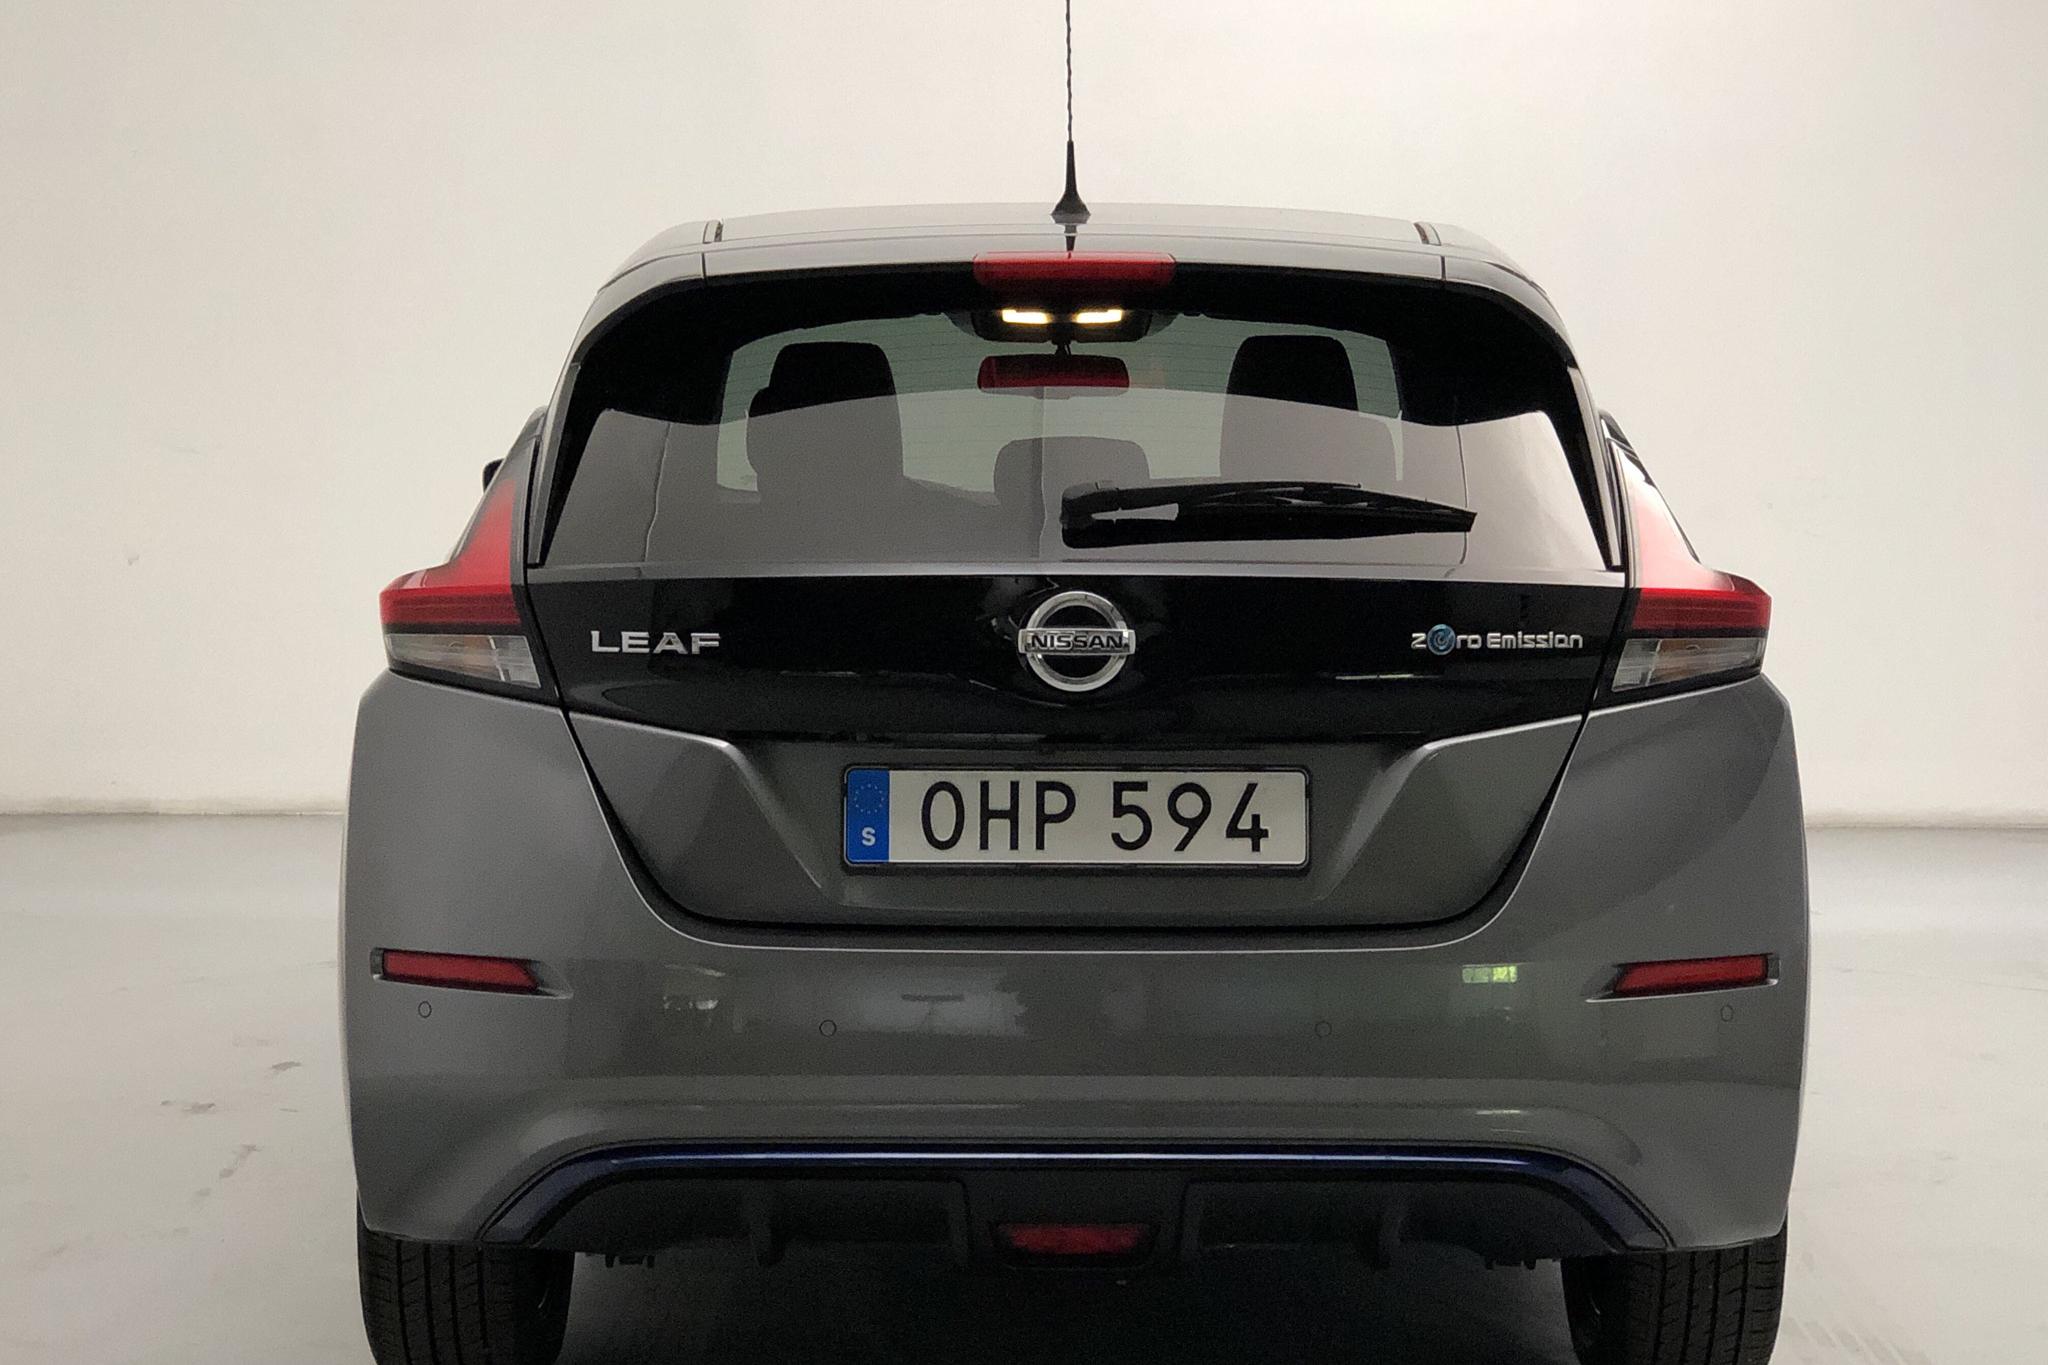 Nissan LEAF 5dr 40 kWh (150hk) - 35 970 km - Automatic - gray - 2019